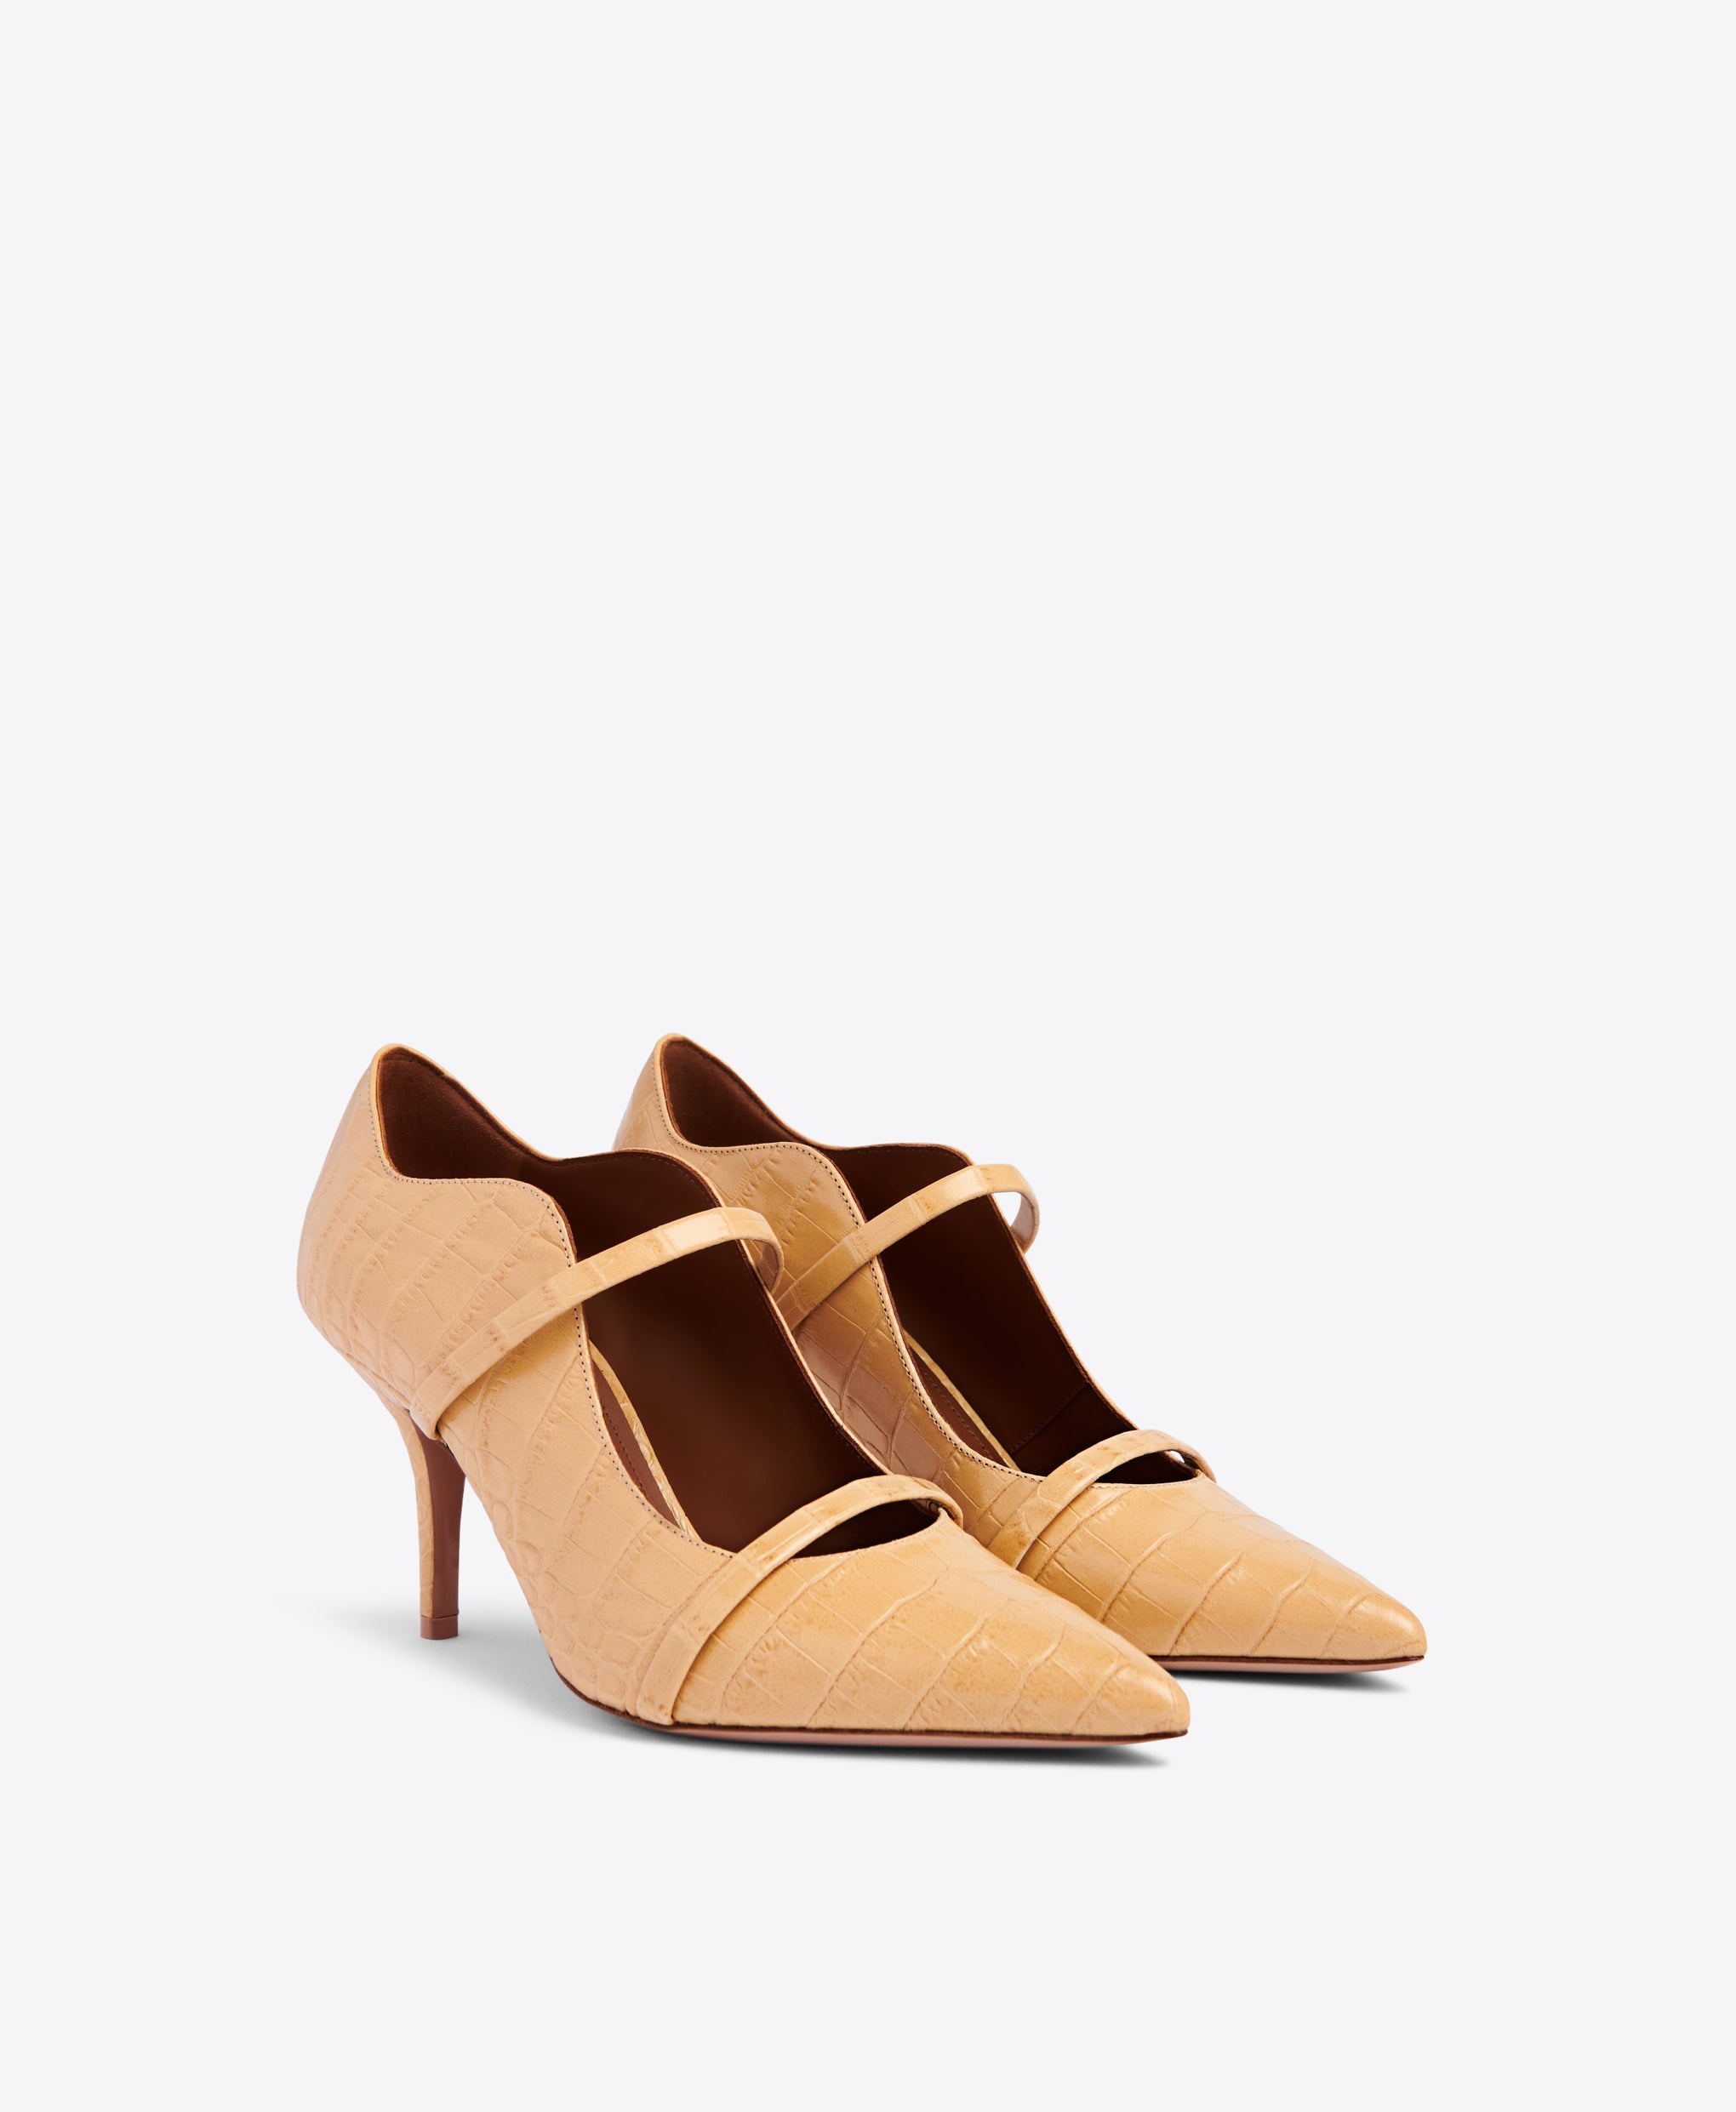 Double Strap Beige Pointed Toe Stiletto Pumps - Embossed Leather | Malone Souliers